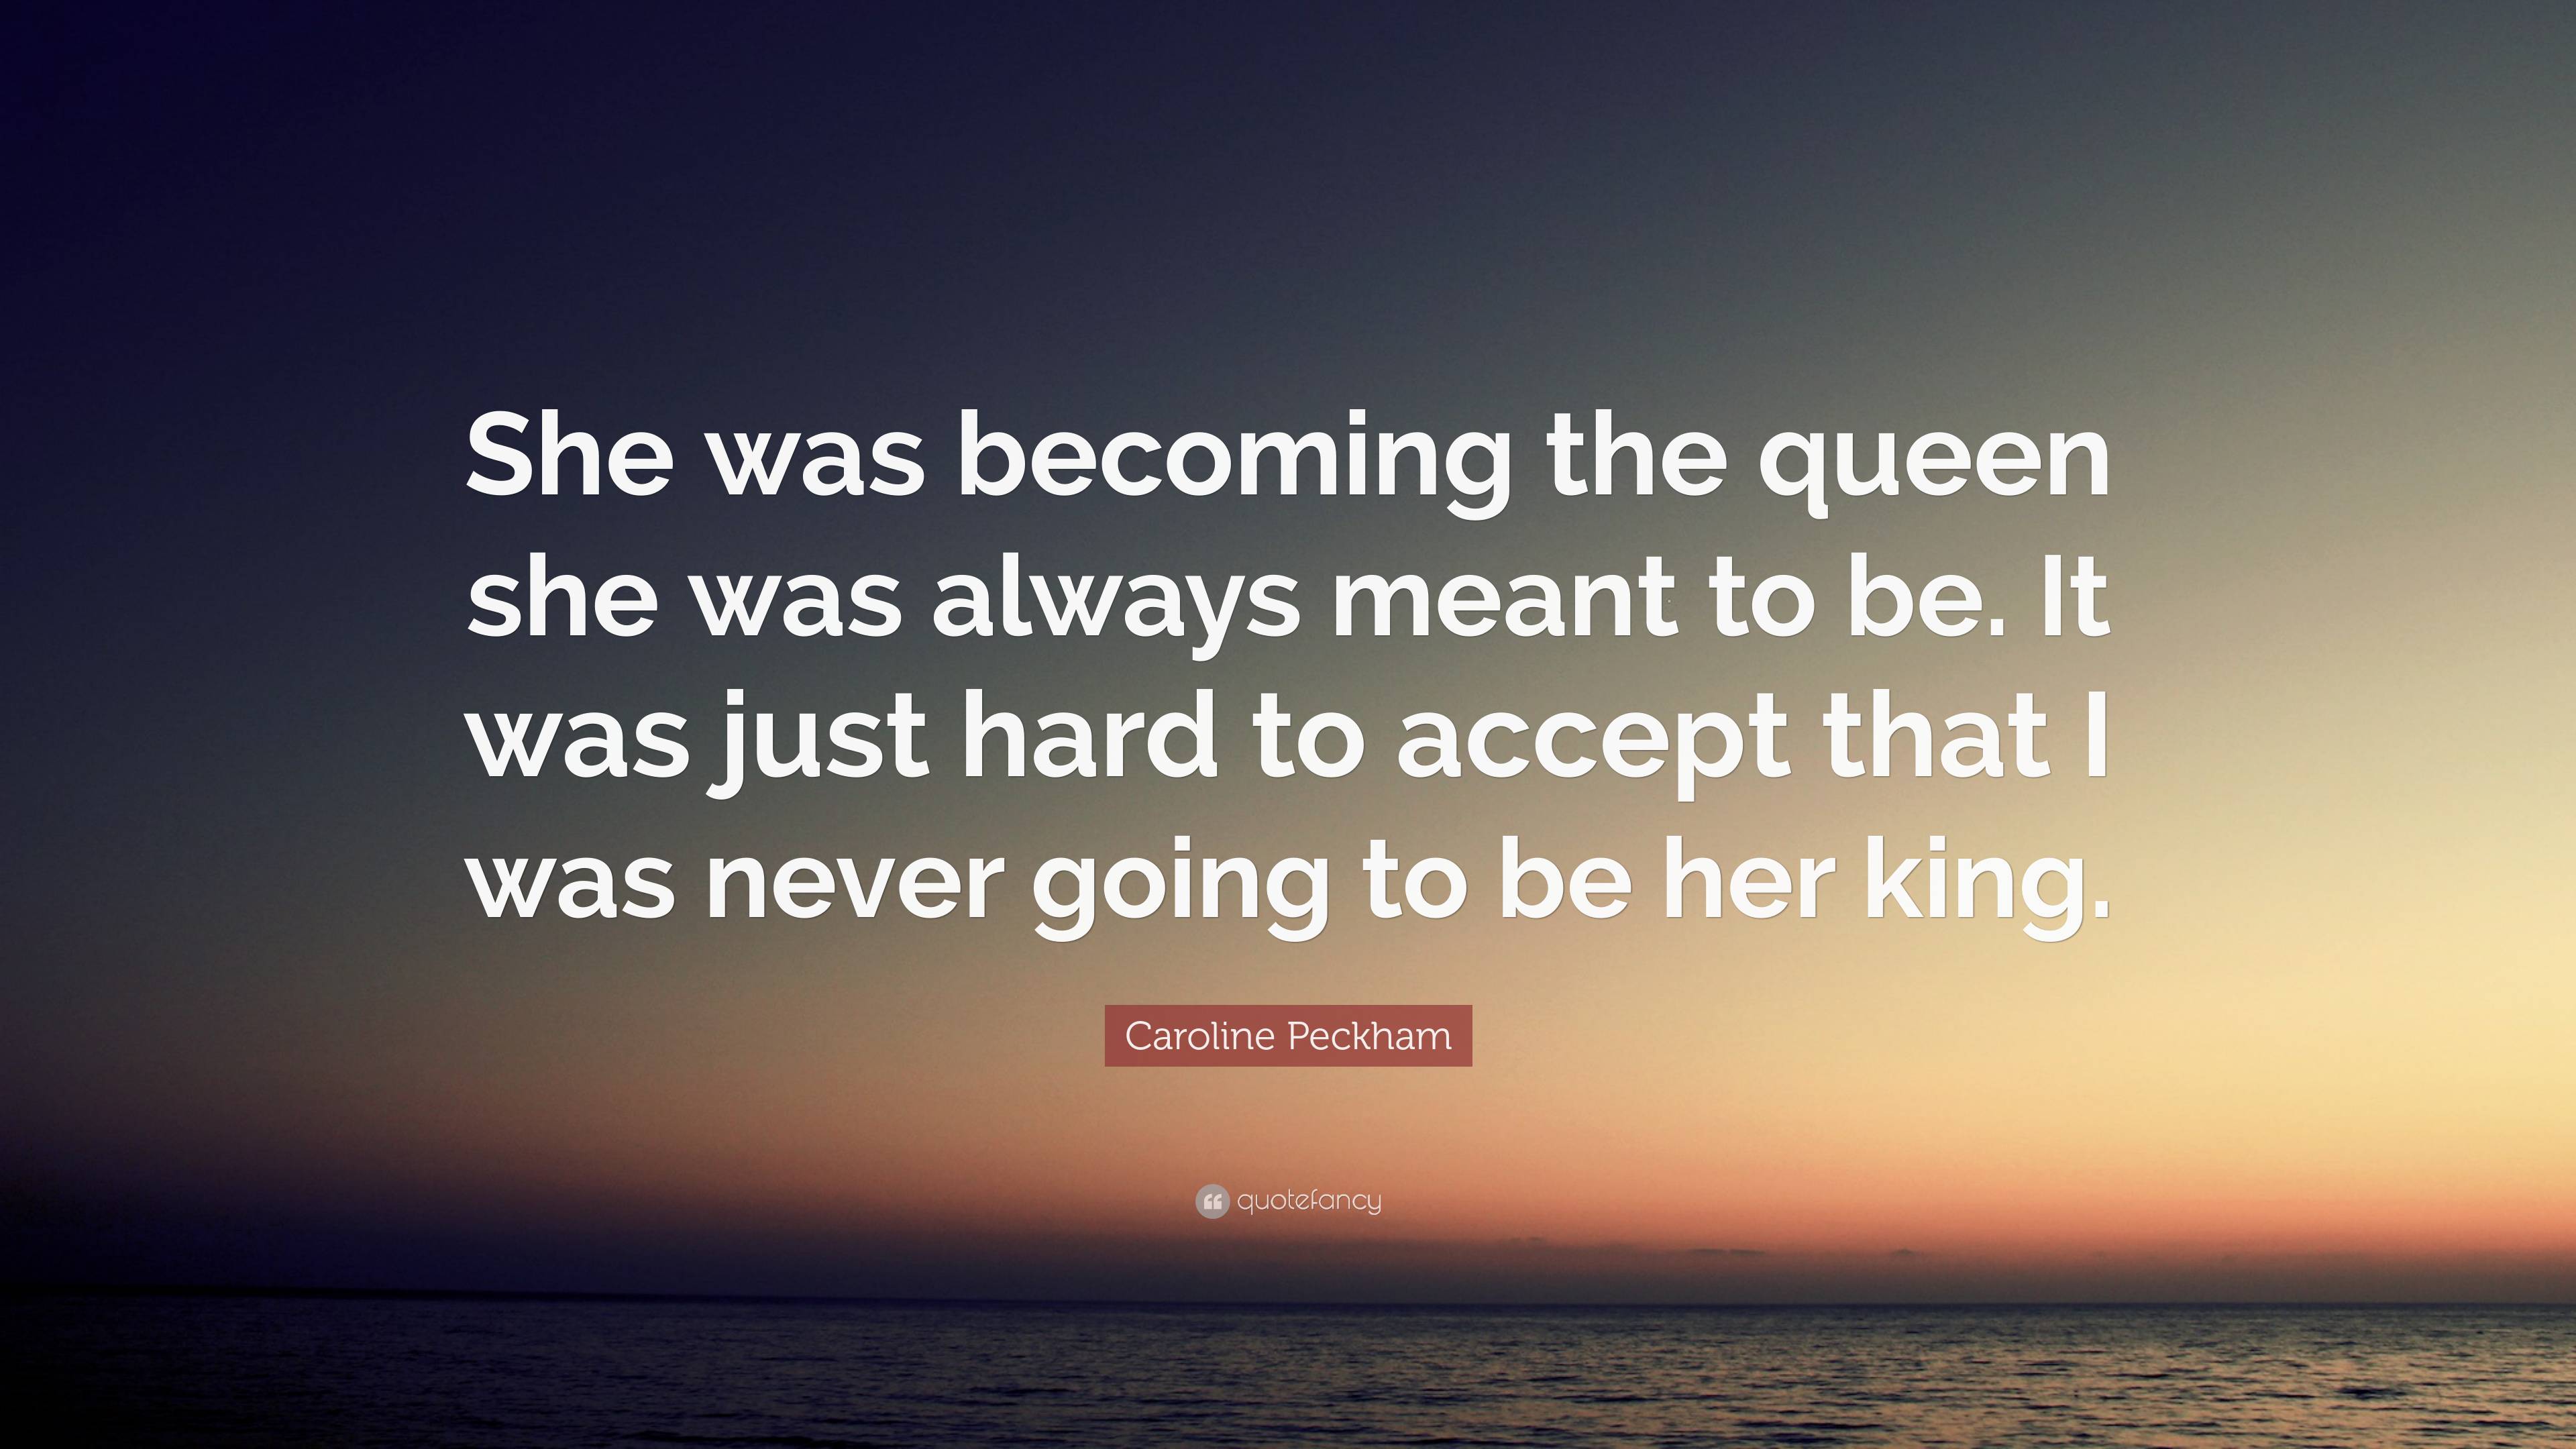 Caroline Peckham Quote: “She was becoming the queen she was always ...